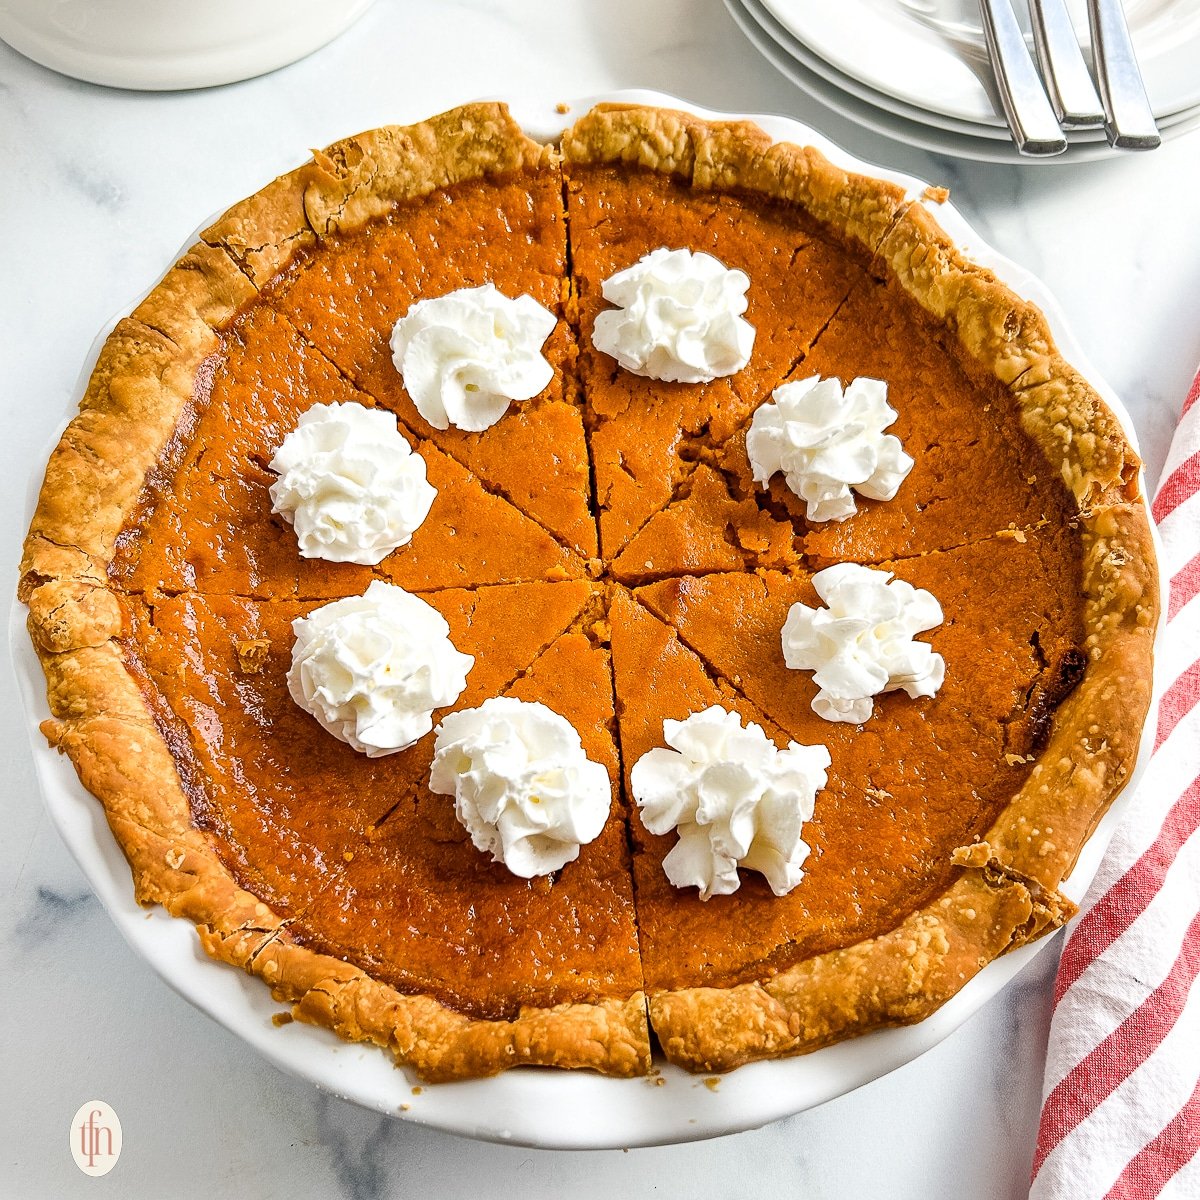 Whole carrot pie in a pie plate.